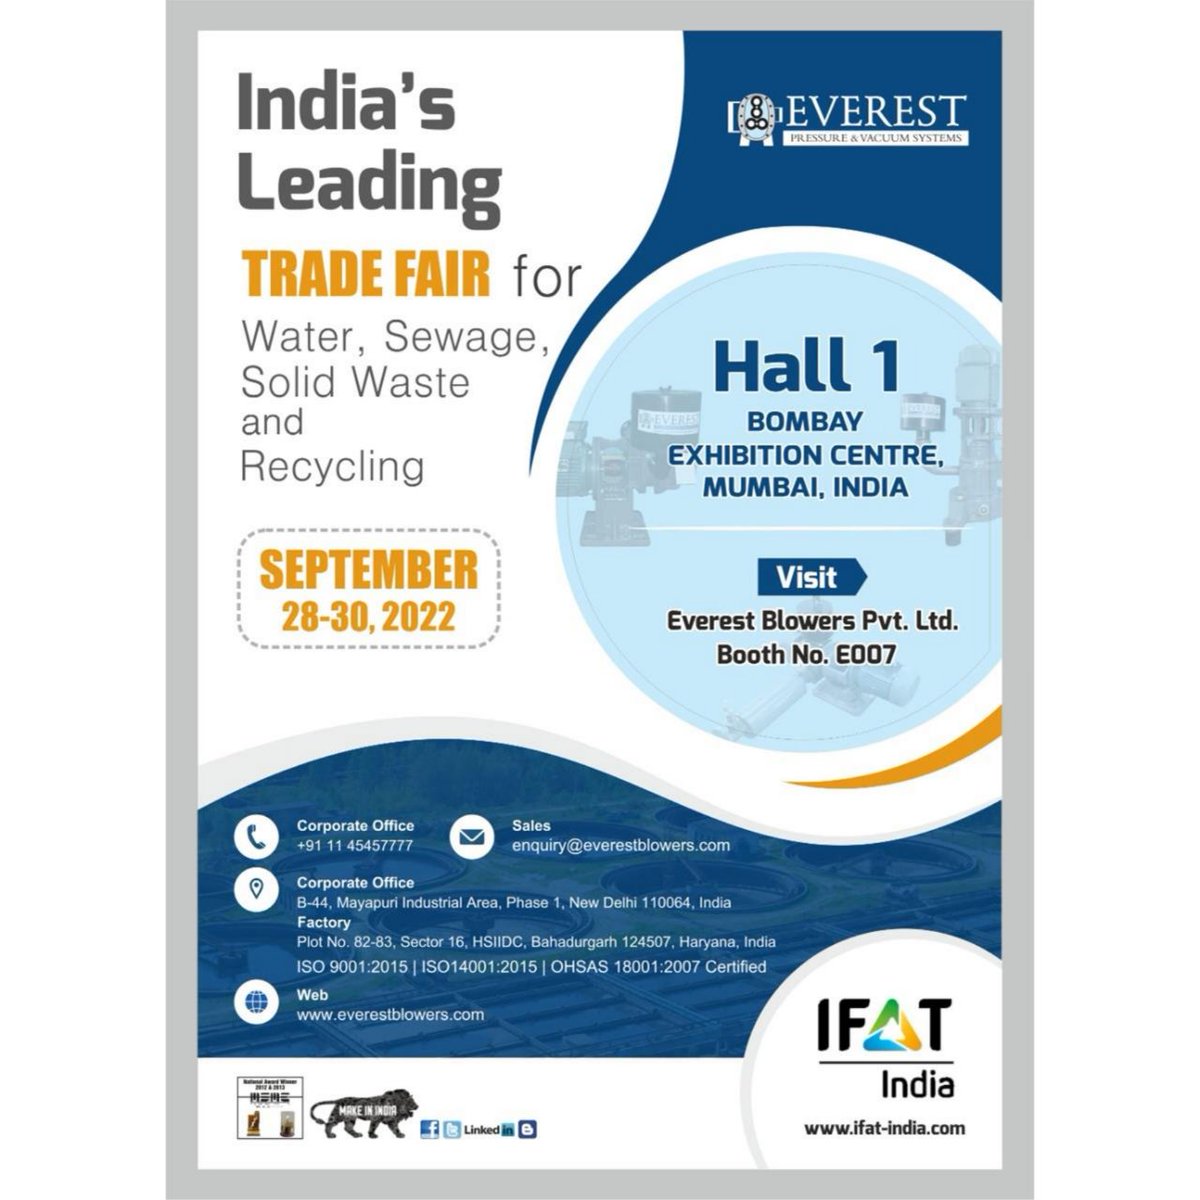 Everest Turbo is exhibiting at IFAT INDIA 2022 Exhibition in Bombay Exhibition Centre, Mumbai, India from September 28- 30, 2022.

#IFAT #IFATINDIA #IFAT2022 #BombayExhibition #EverestBlowers #EverestTurbo #WeAreEverestTurbo #LowPressureAirSolutions #RingBlower #CentrifugalBlower